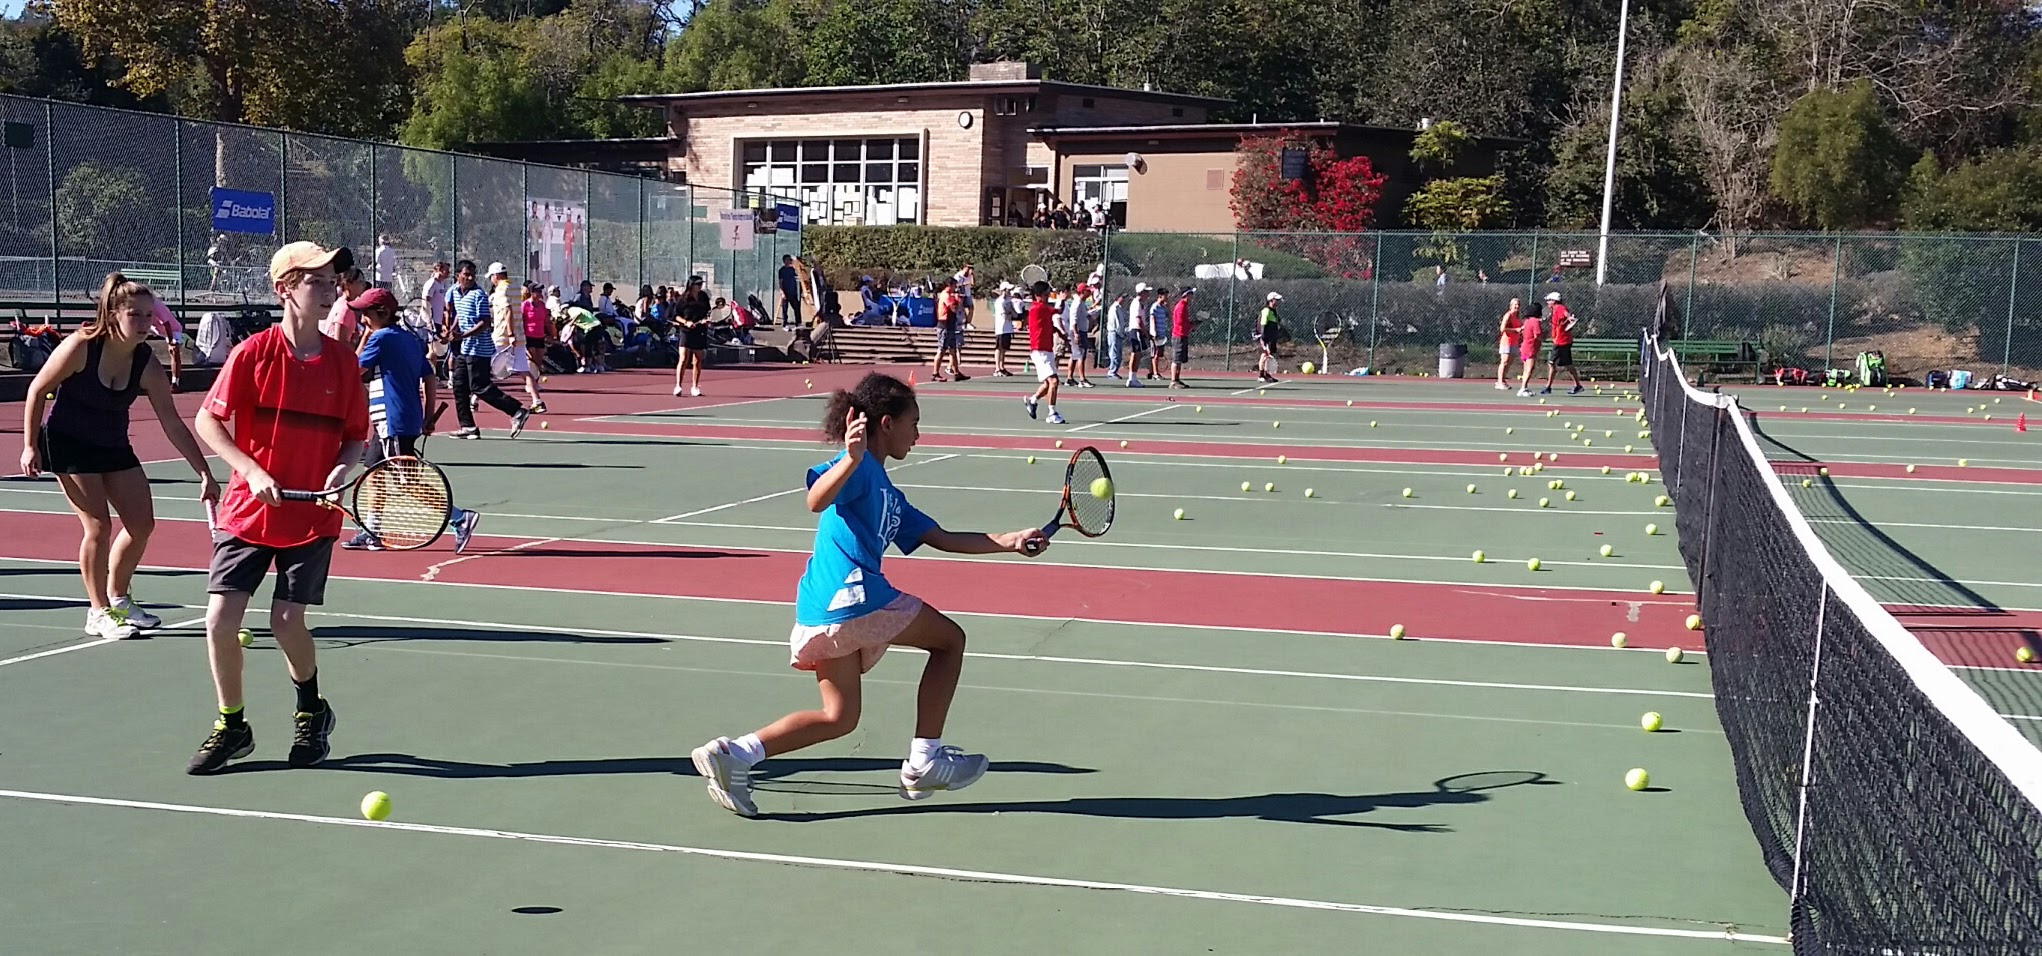 Two new apps to connect SF tennis players – Tennis Coalition SF